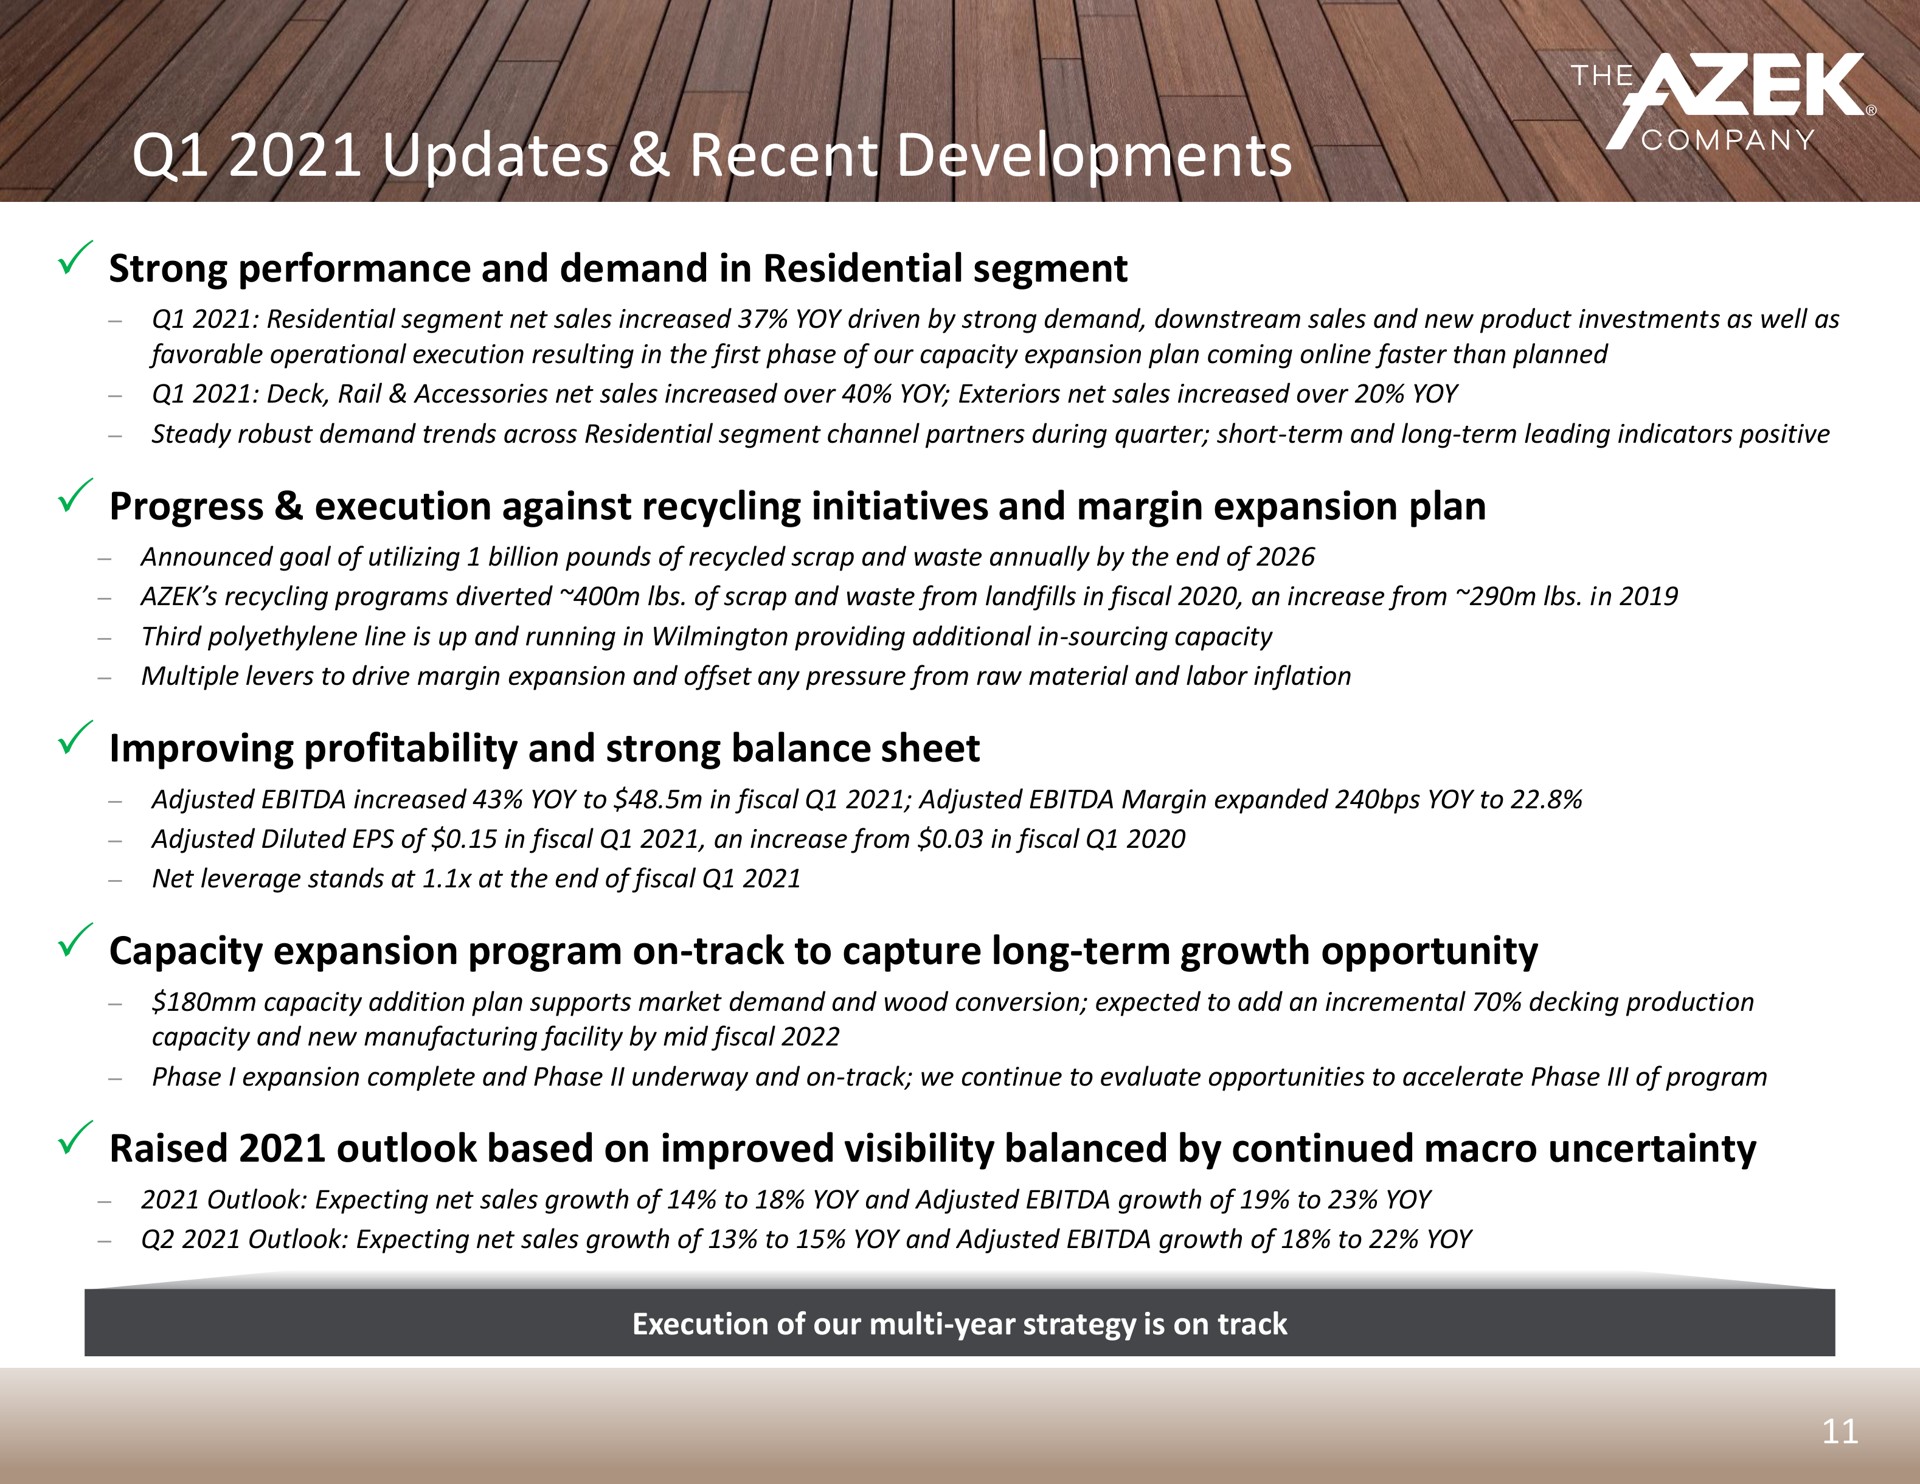 updates recent developments strong performance and demand in residential segment progress execution against recycling initiatives and margin expansion plan improving profitability and strong balance sheet capacity expansion program on track to capture long term growth opportunity raised outlook based on improved visibility balanced by continued macro uncertainty so | Azek